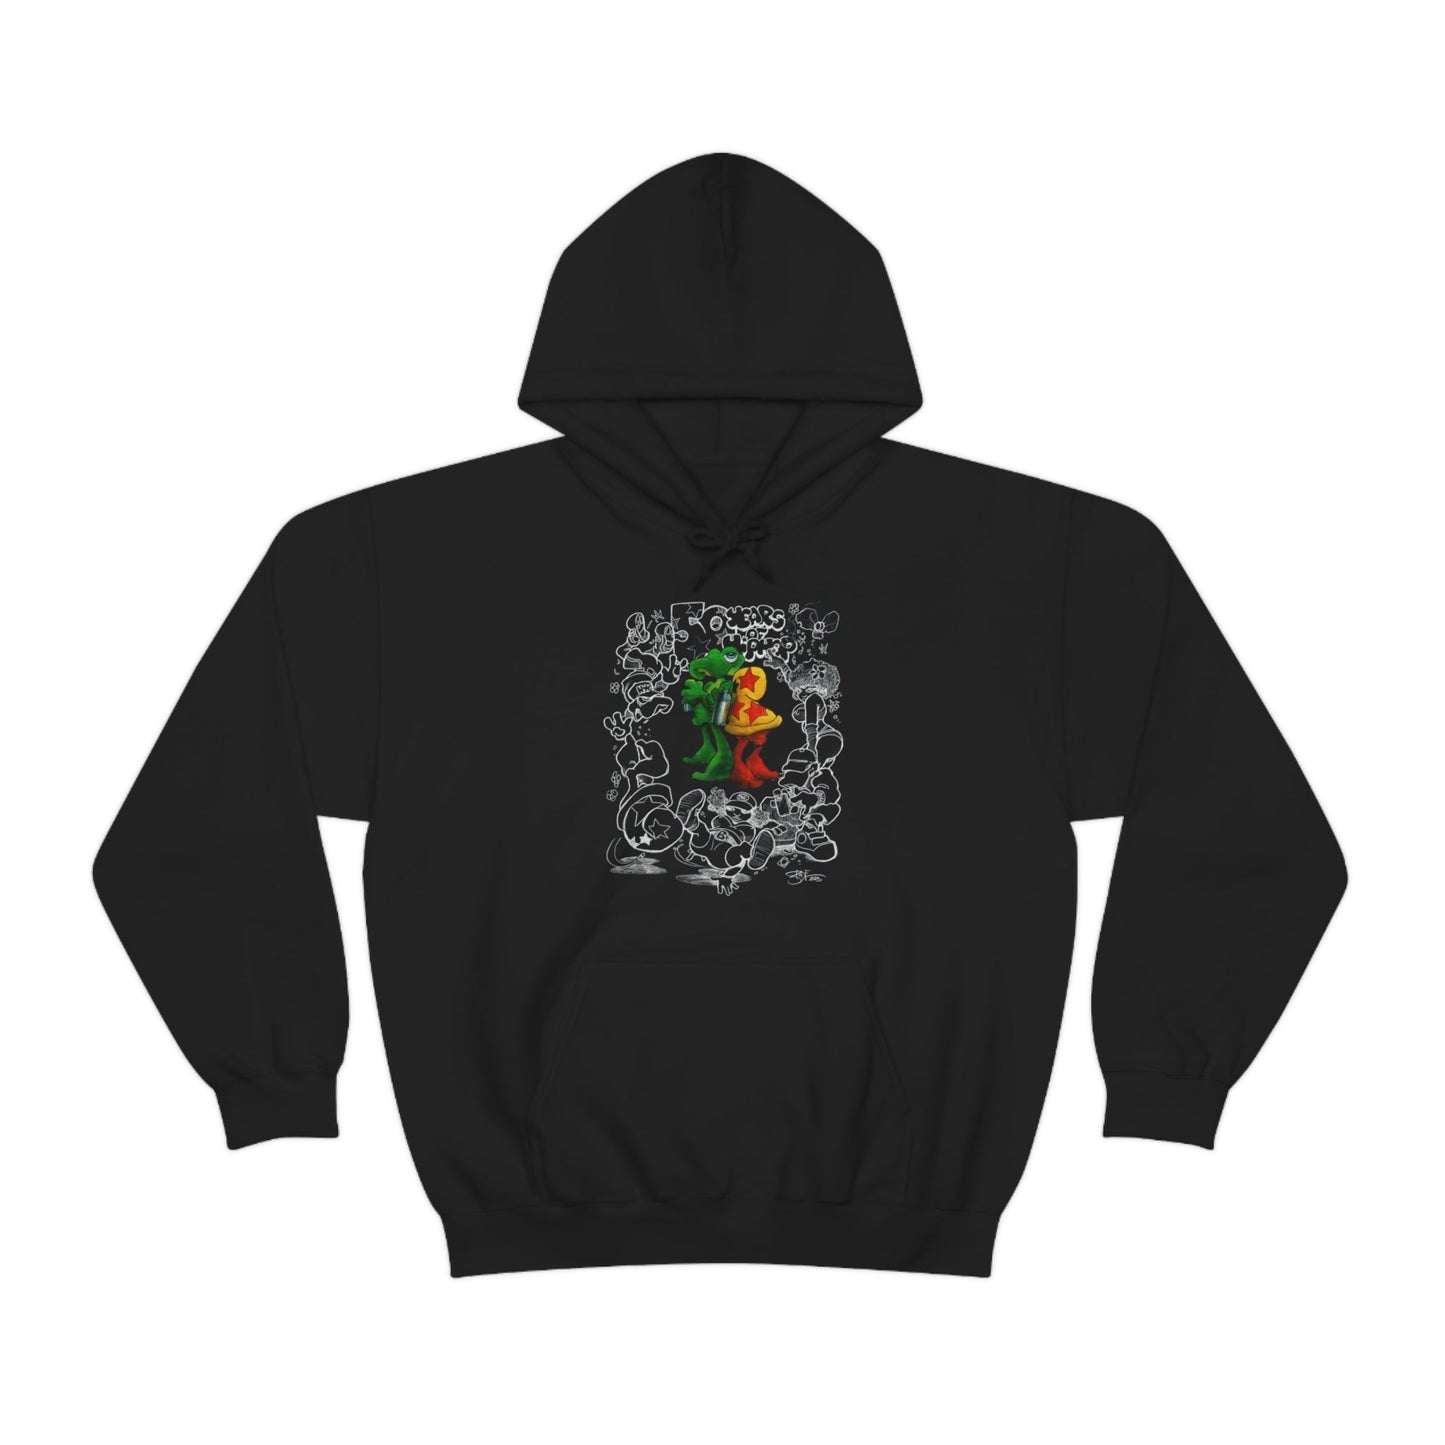 Bode X 50th Anniversary of Hip Hop Limited Edition 2-Sided Hoodie Black